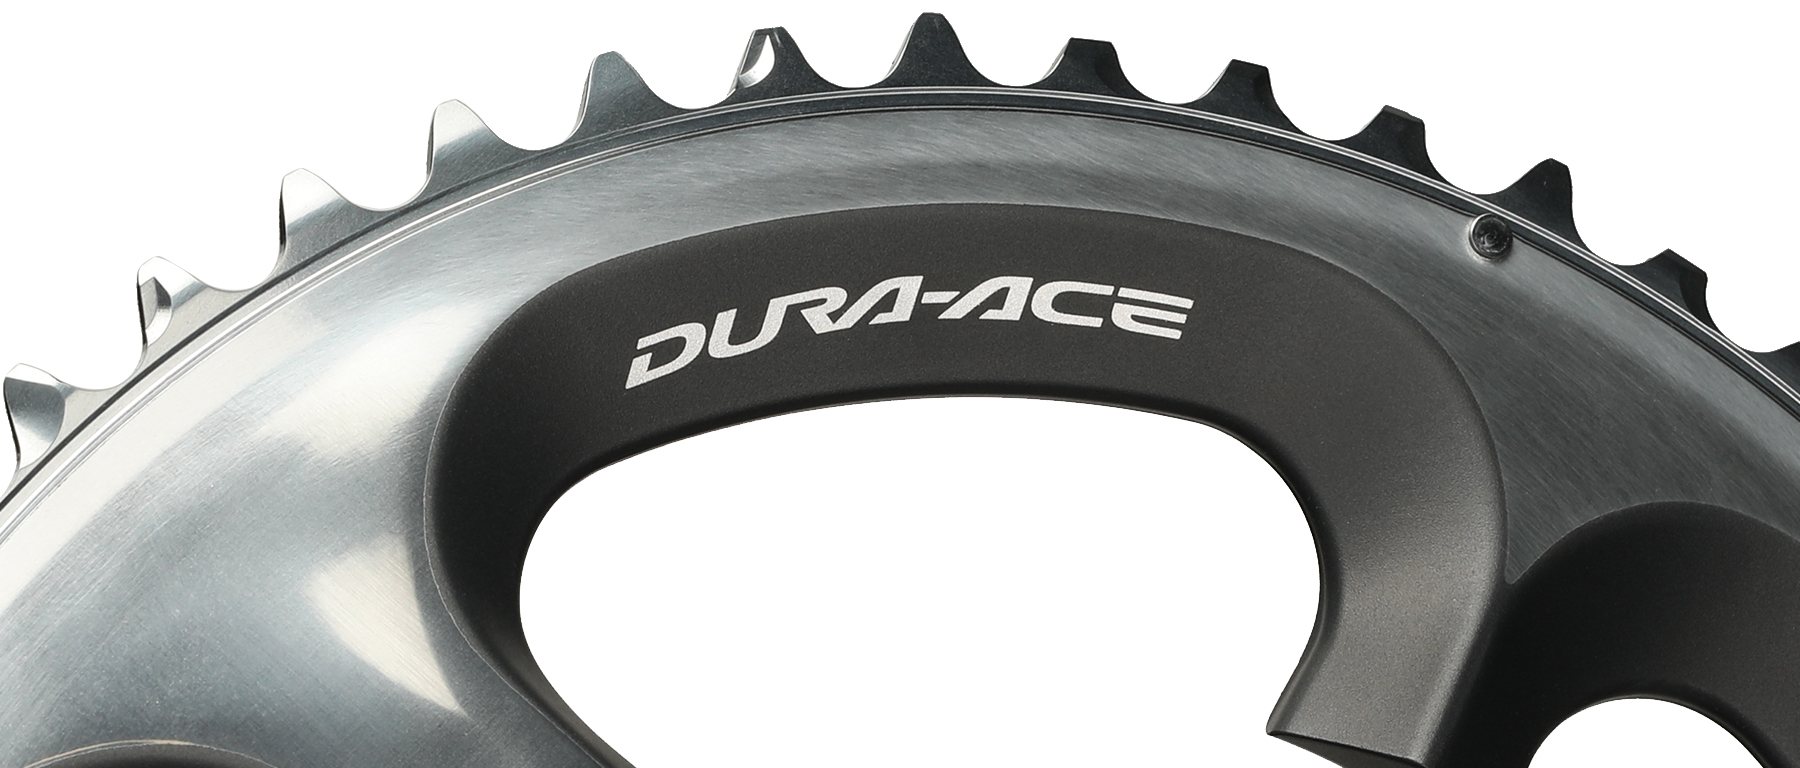 Shimano Dura-Ace FC-7900 Outer Chainring